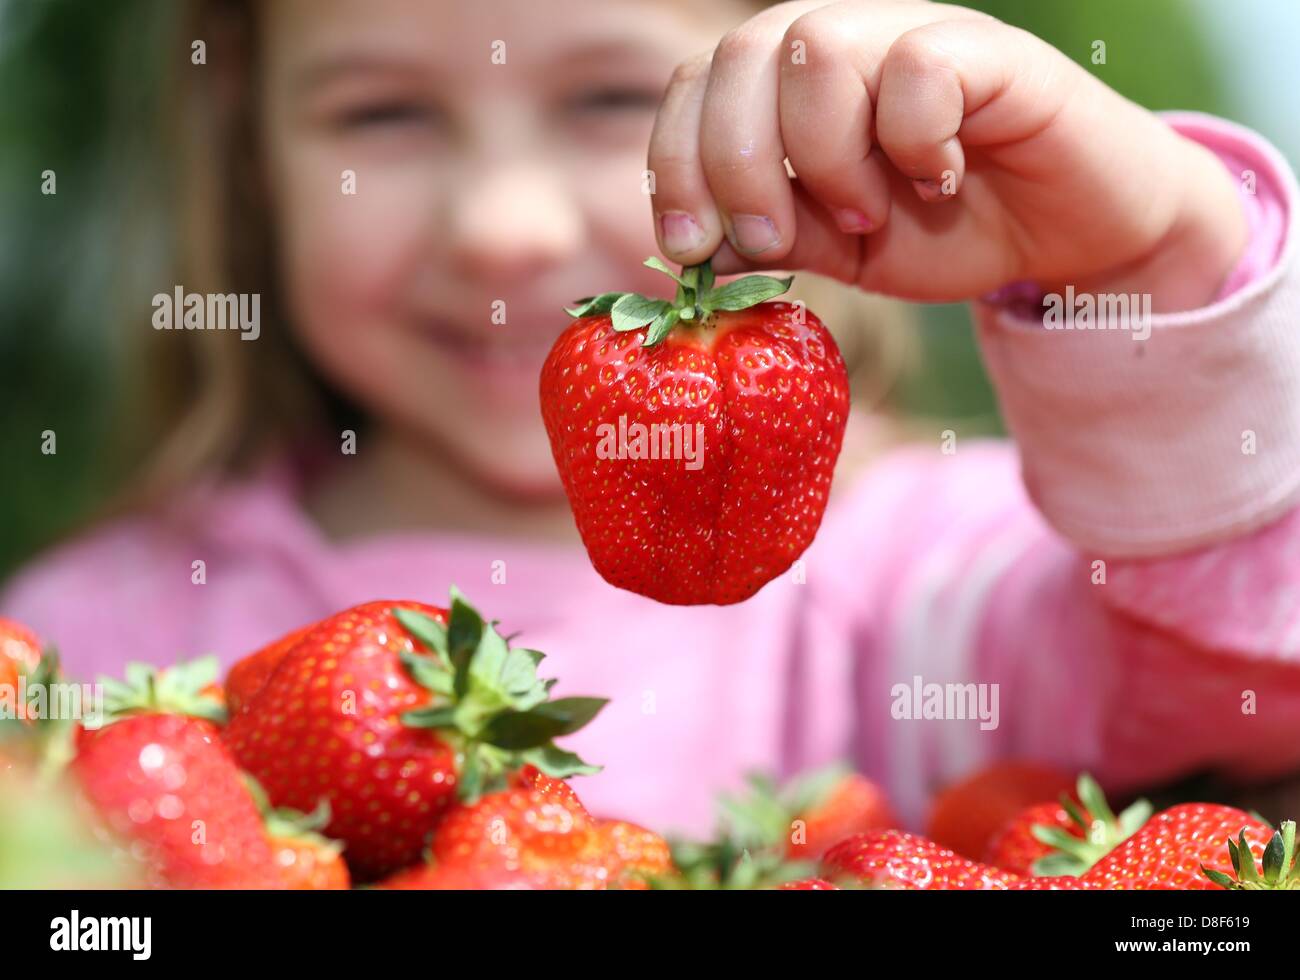 Wiedenbrueck, Germany, 27 May 2013.Six-year old Jule eats a freshly harvested strawberry in Rheda-Wiedenbrueck, Germany, 27 May 2013. The strawberry harvest has started late in Germany with two weeks into the season due to the recent cold and wet spring weather. Photo:  Friso Gentsch/DPA/Alamy Live News Stock Photo